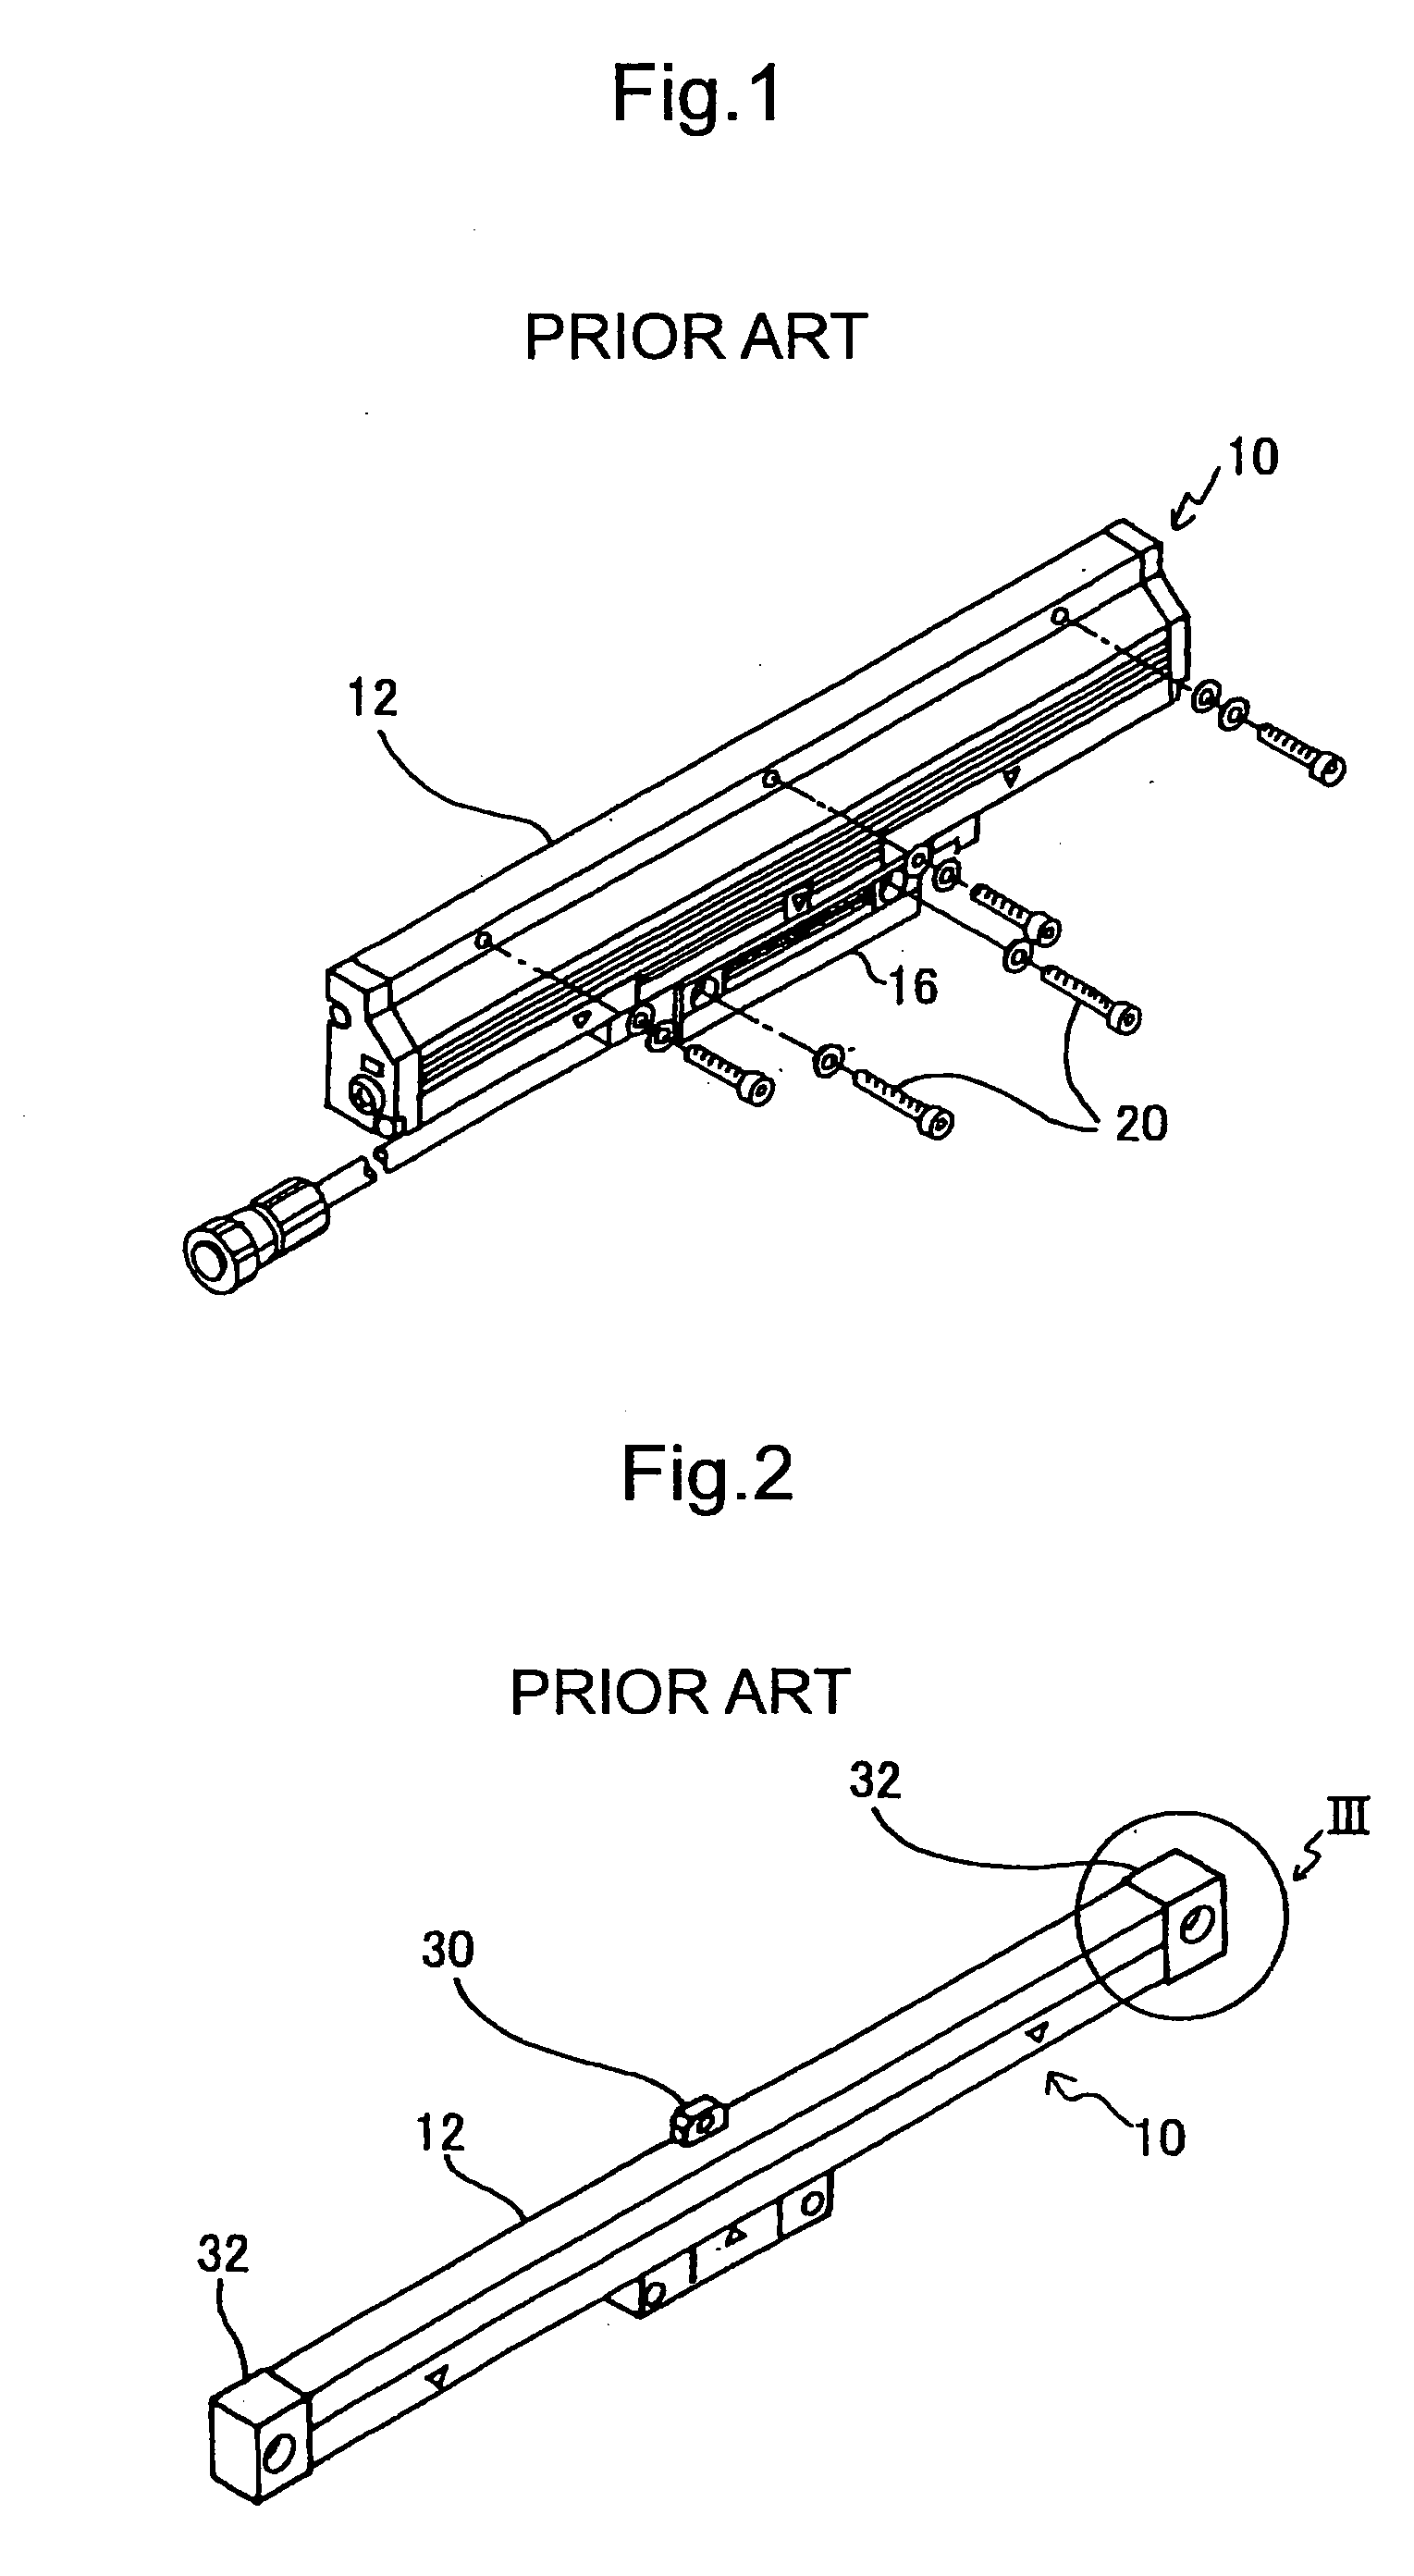 Elastic fixture and attachment method for length measuring apparatus